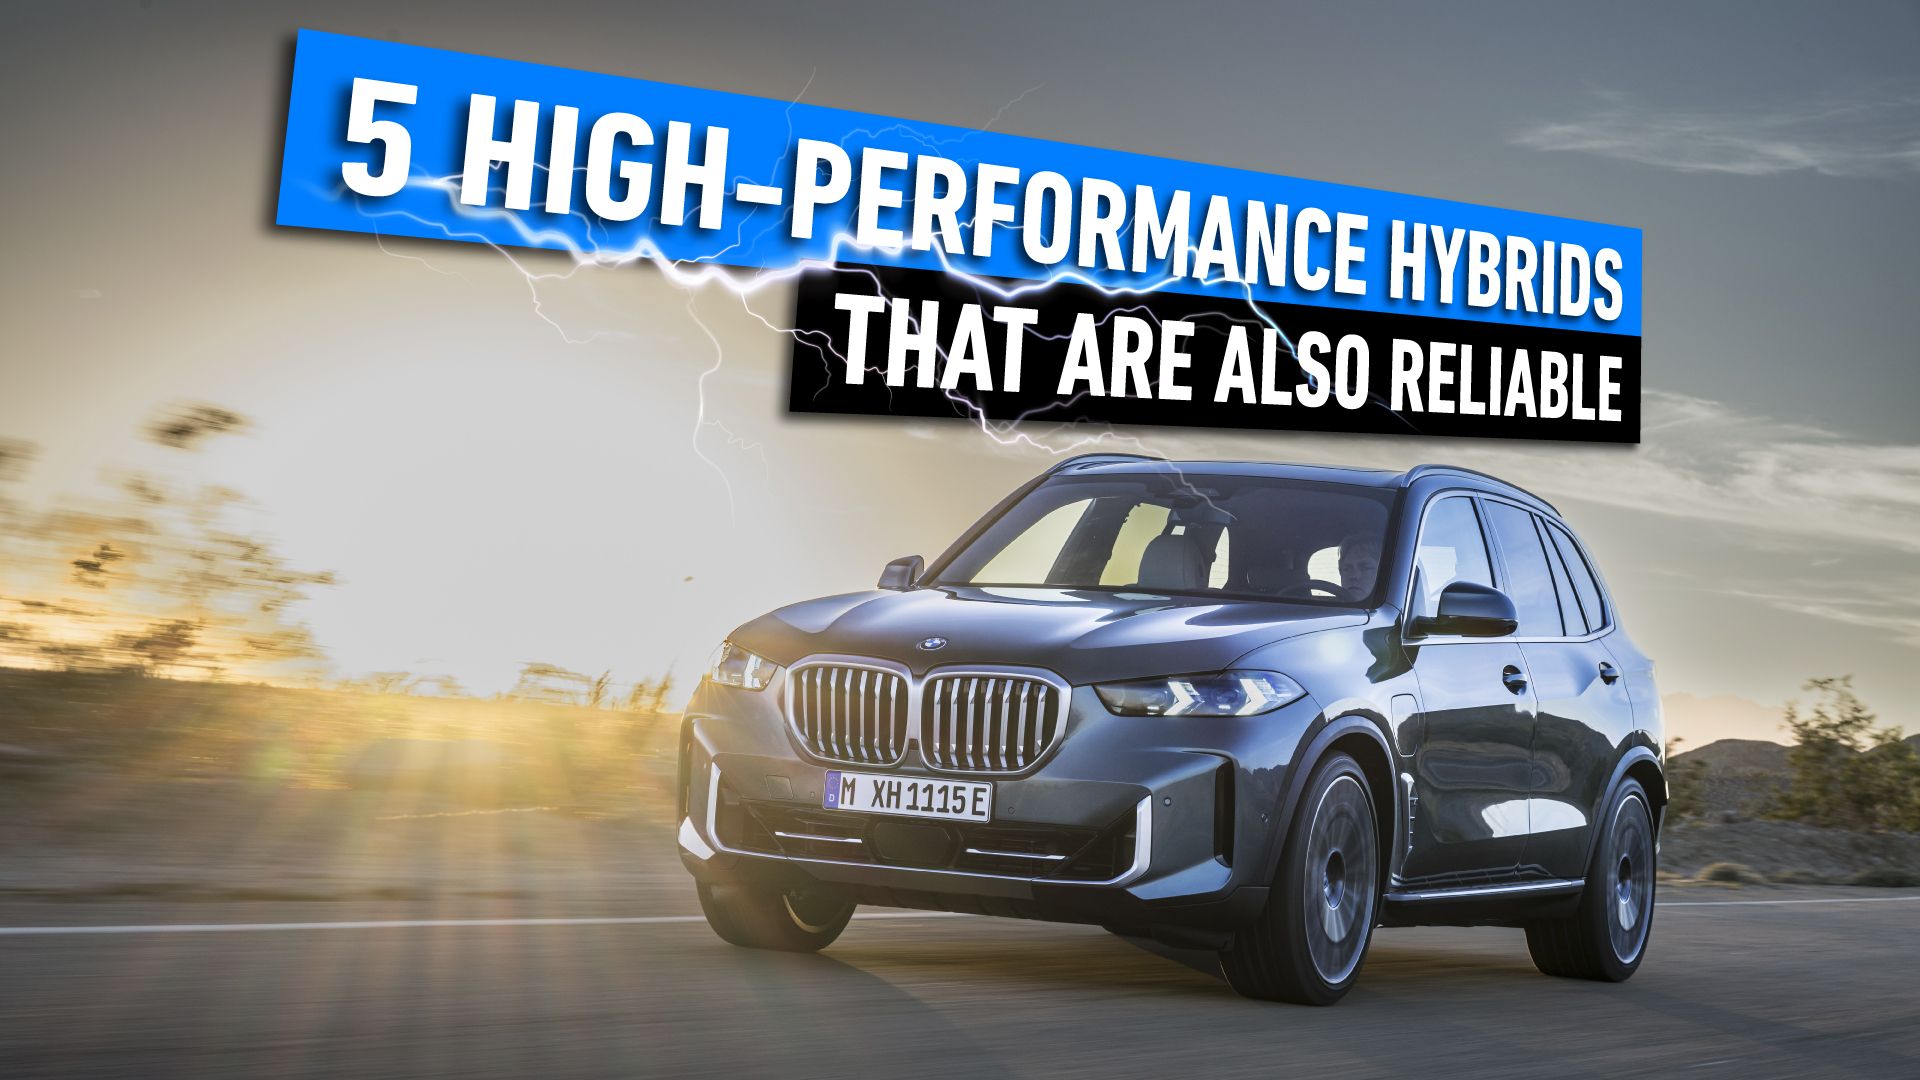 5-High-Performance-Hybrids-Reliable